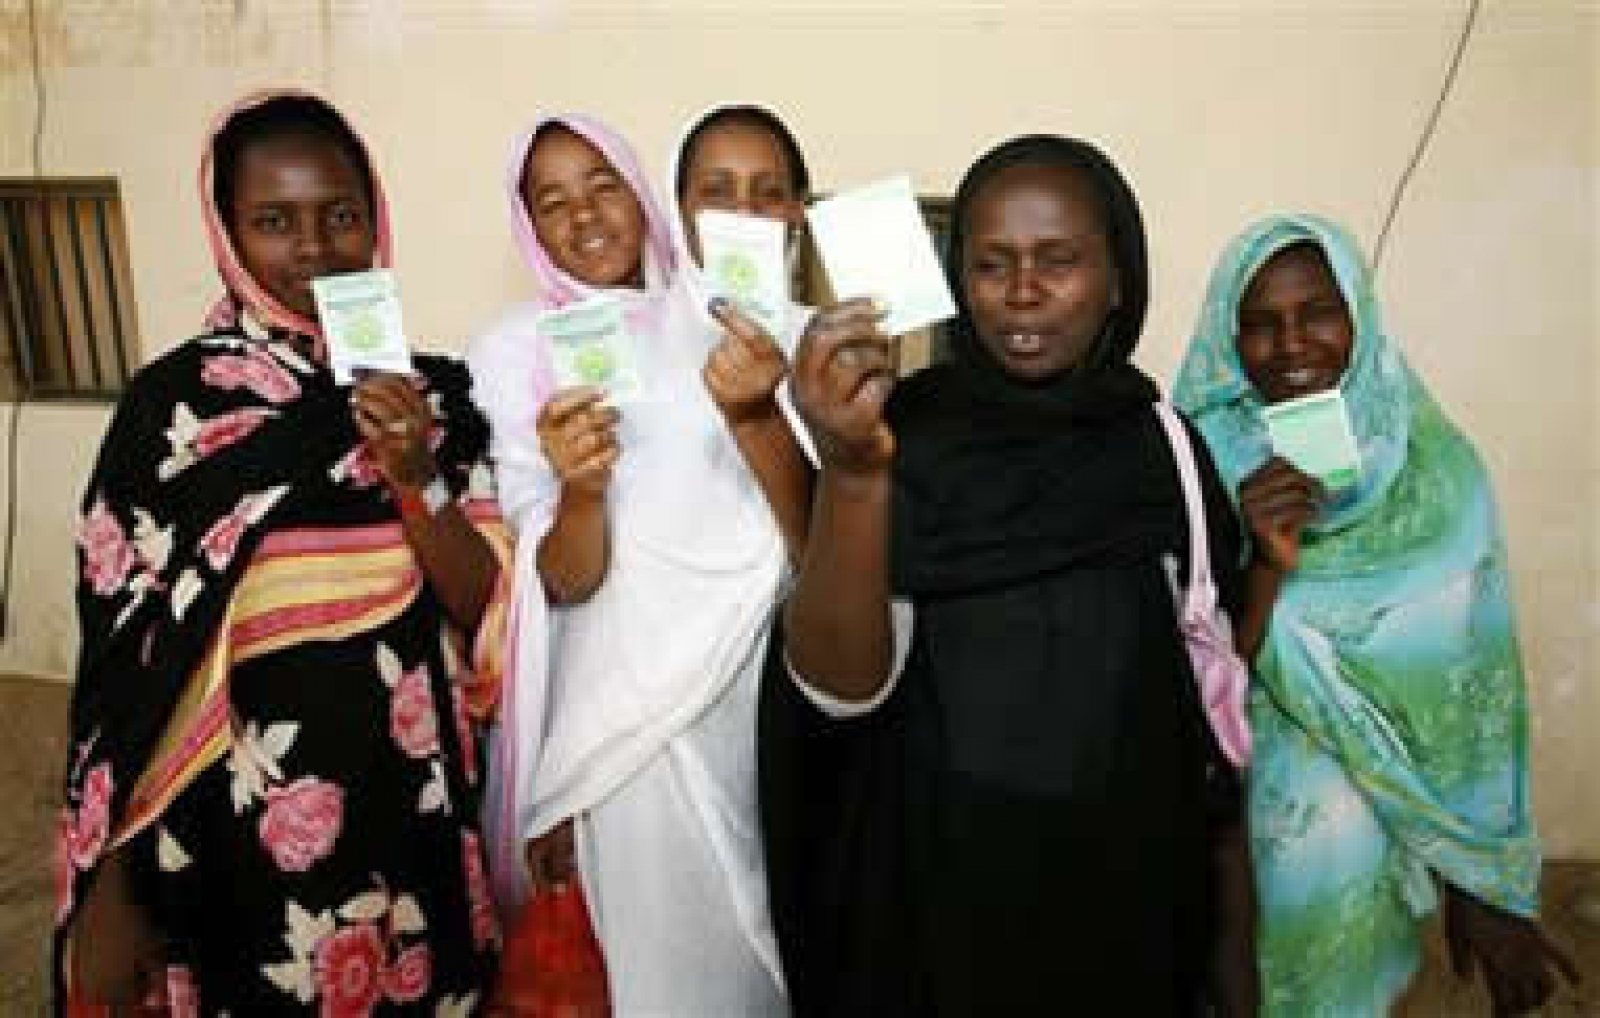 Latest Mauritania Bulletin Details Fallout from Presidential Election Amid Allegations of Fraud